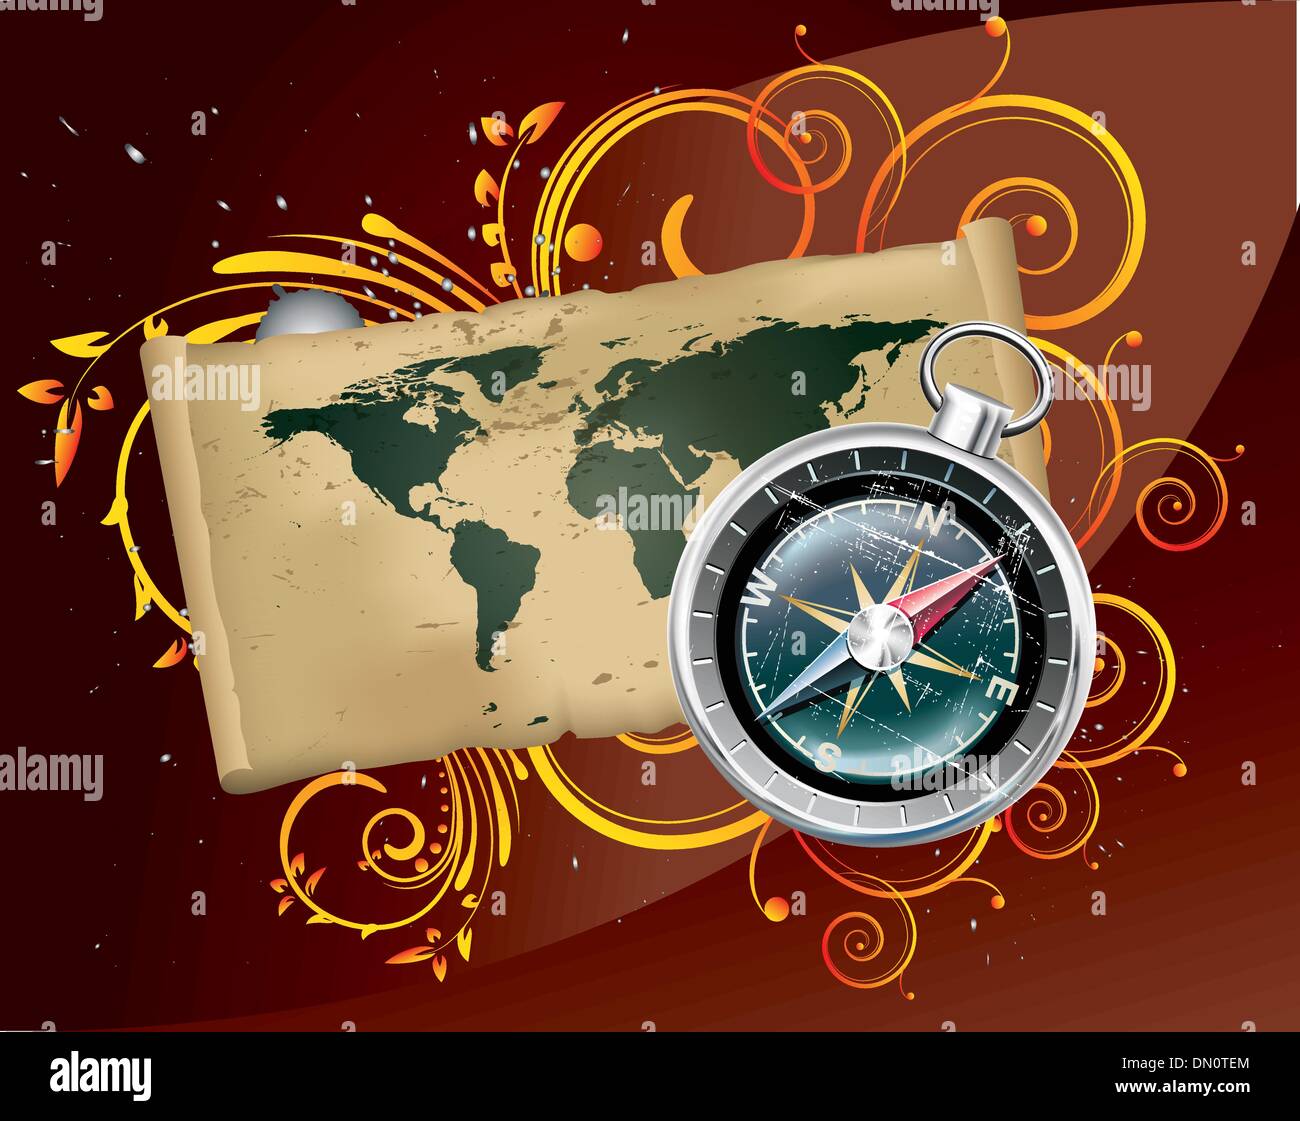 vector image of compass with map Stock Vector